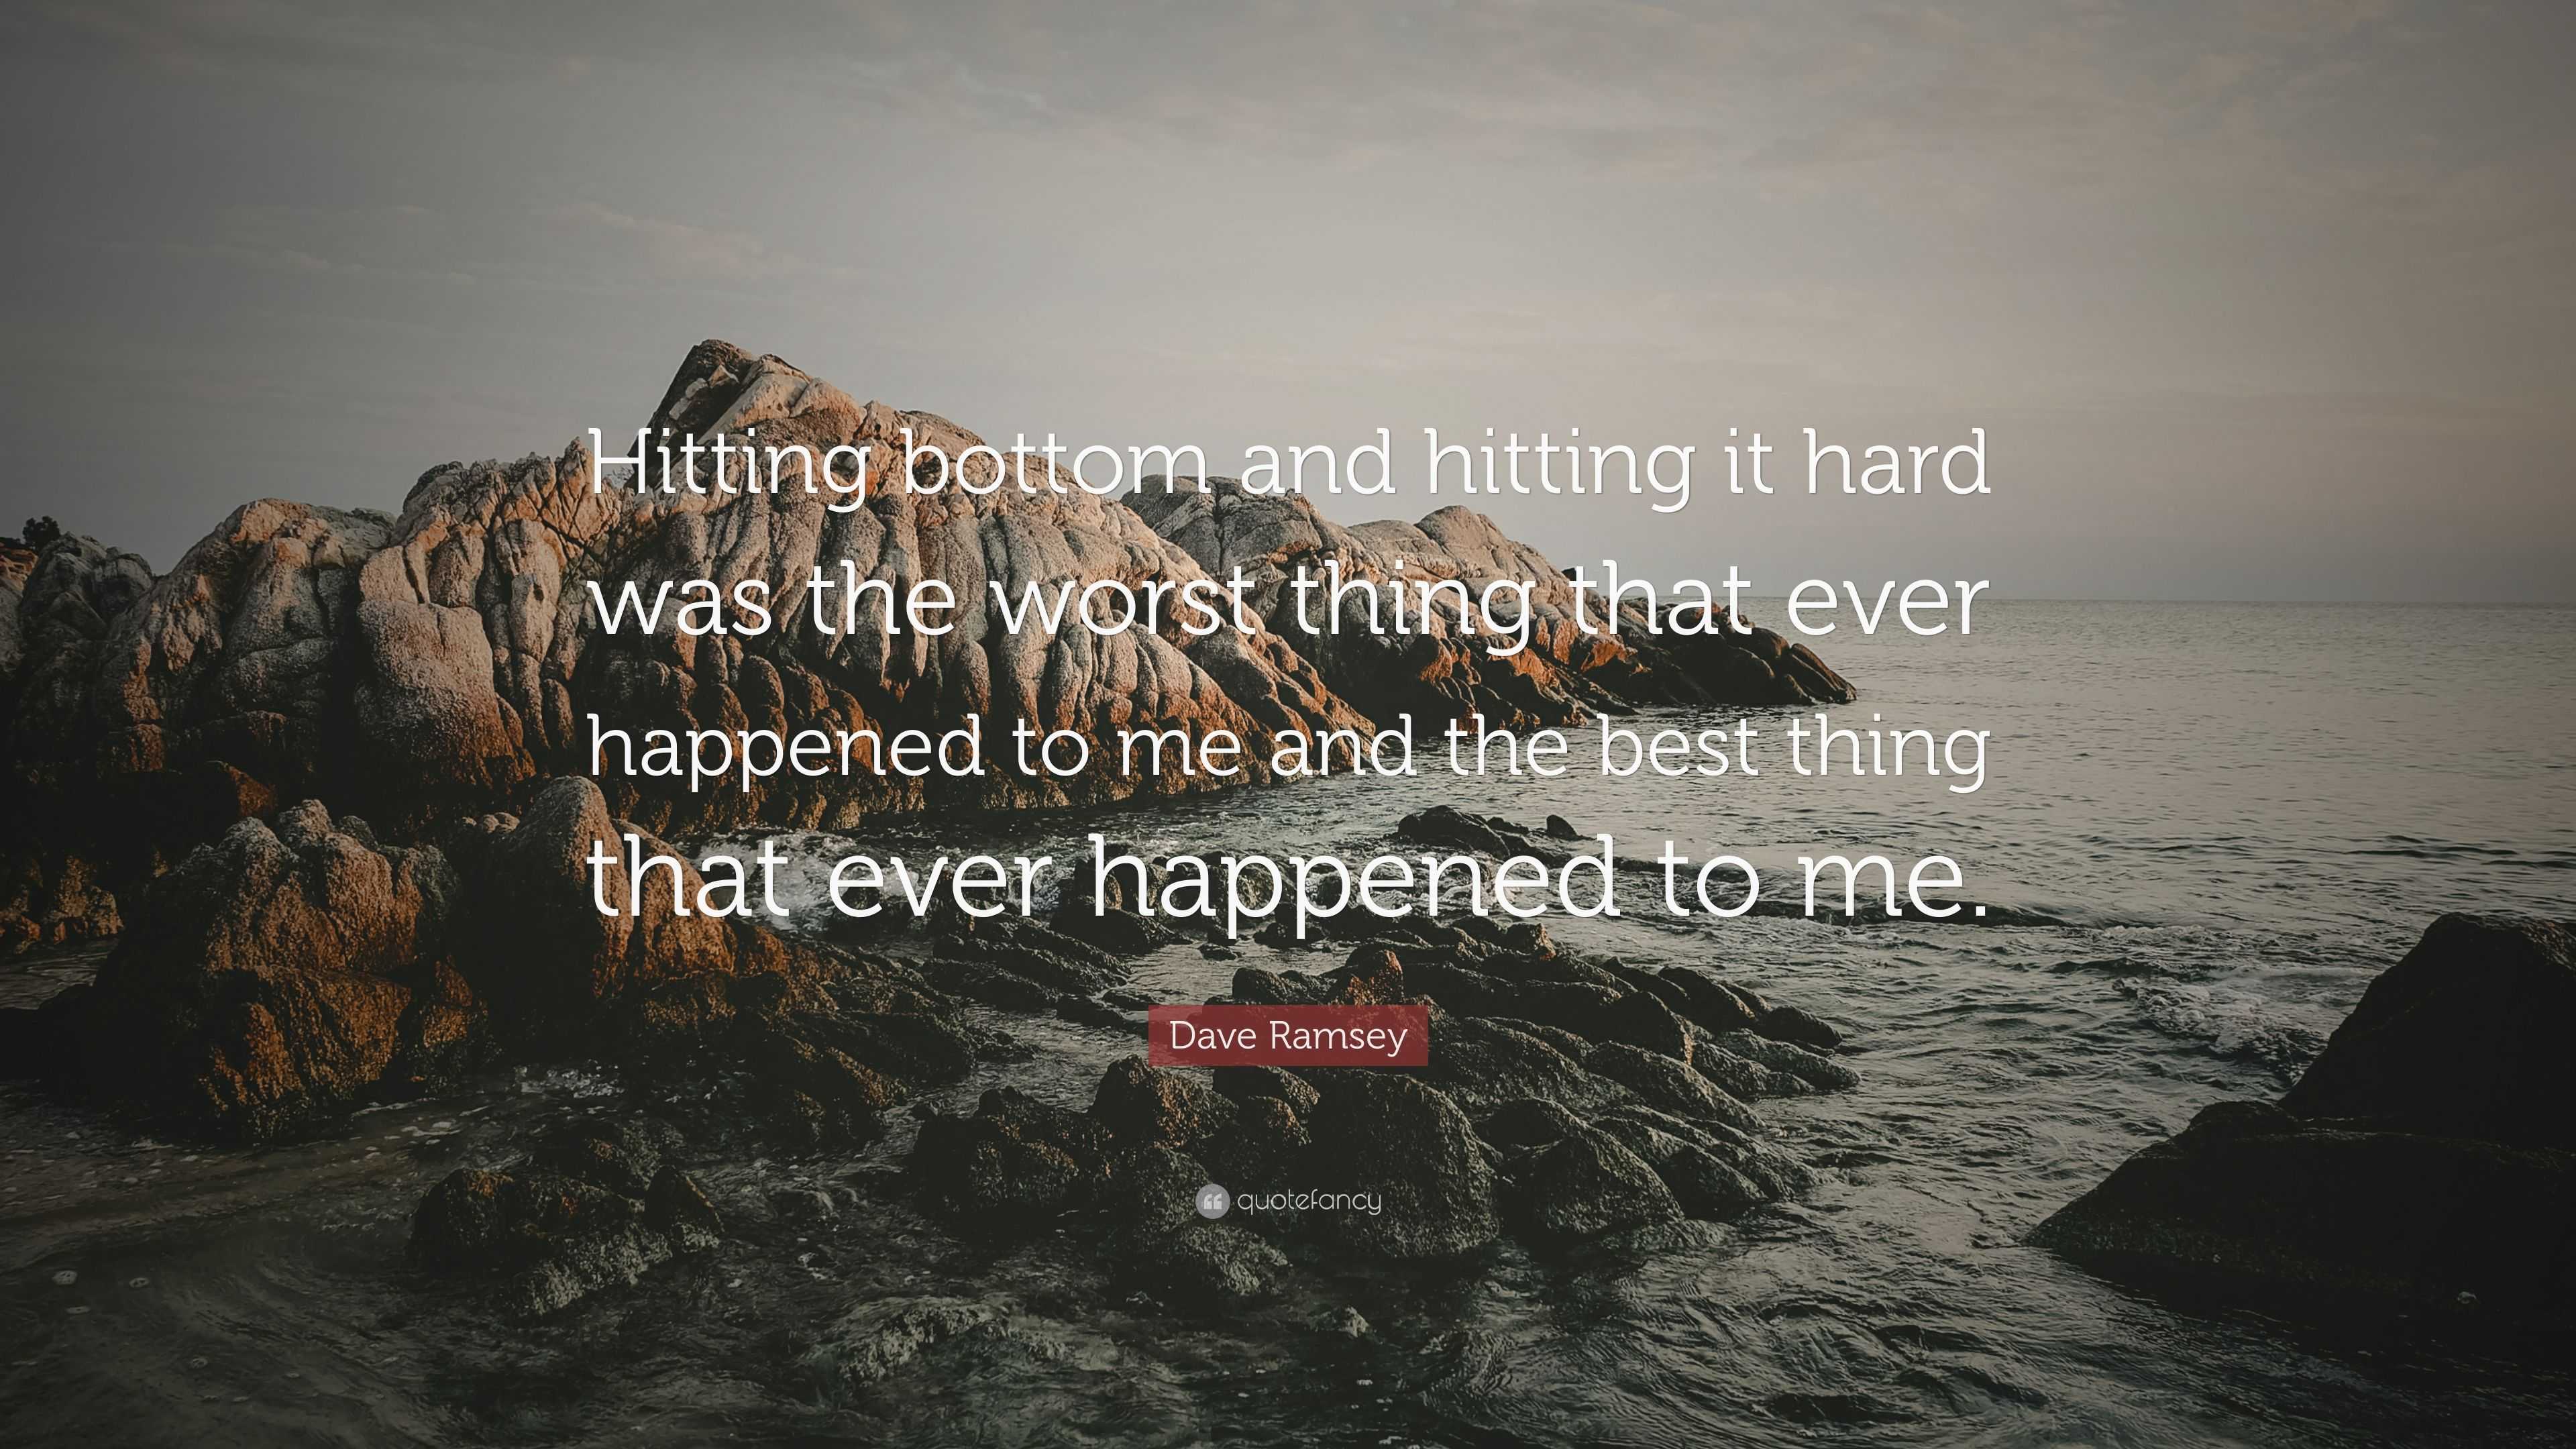 Dave Ramsey Quote: “Hitting bottom and hitting it hard was the worst ...